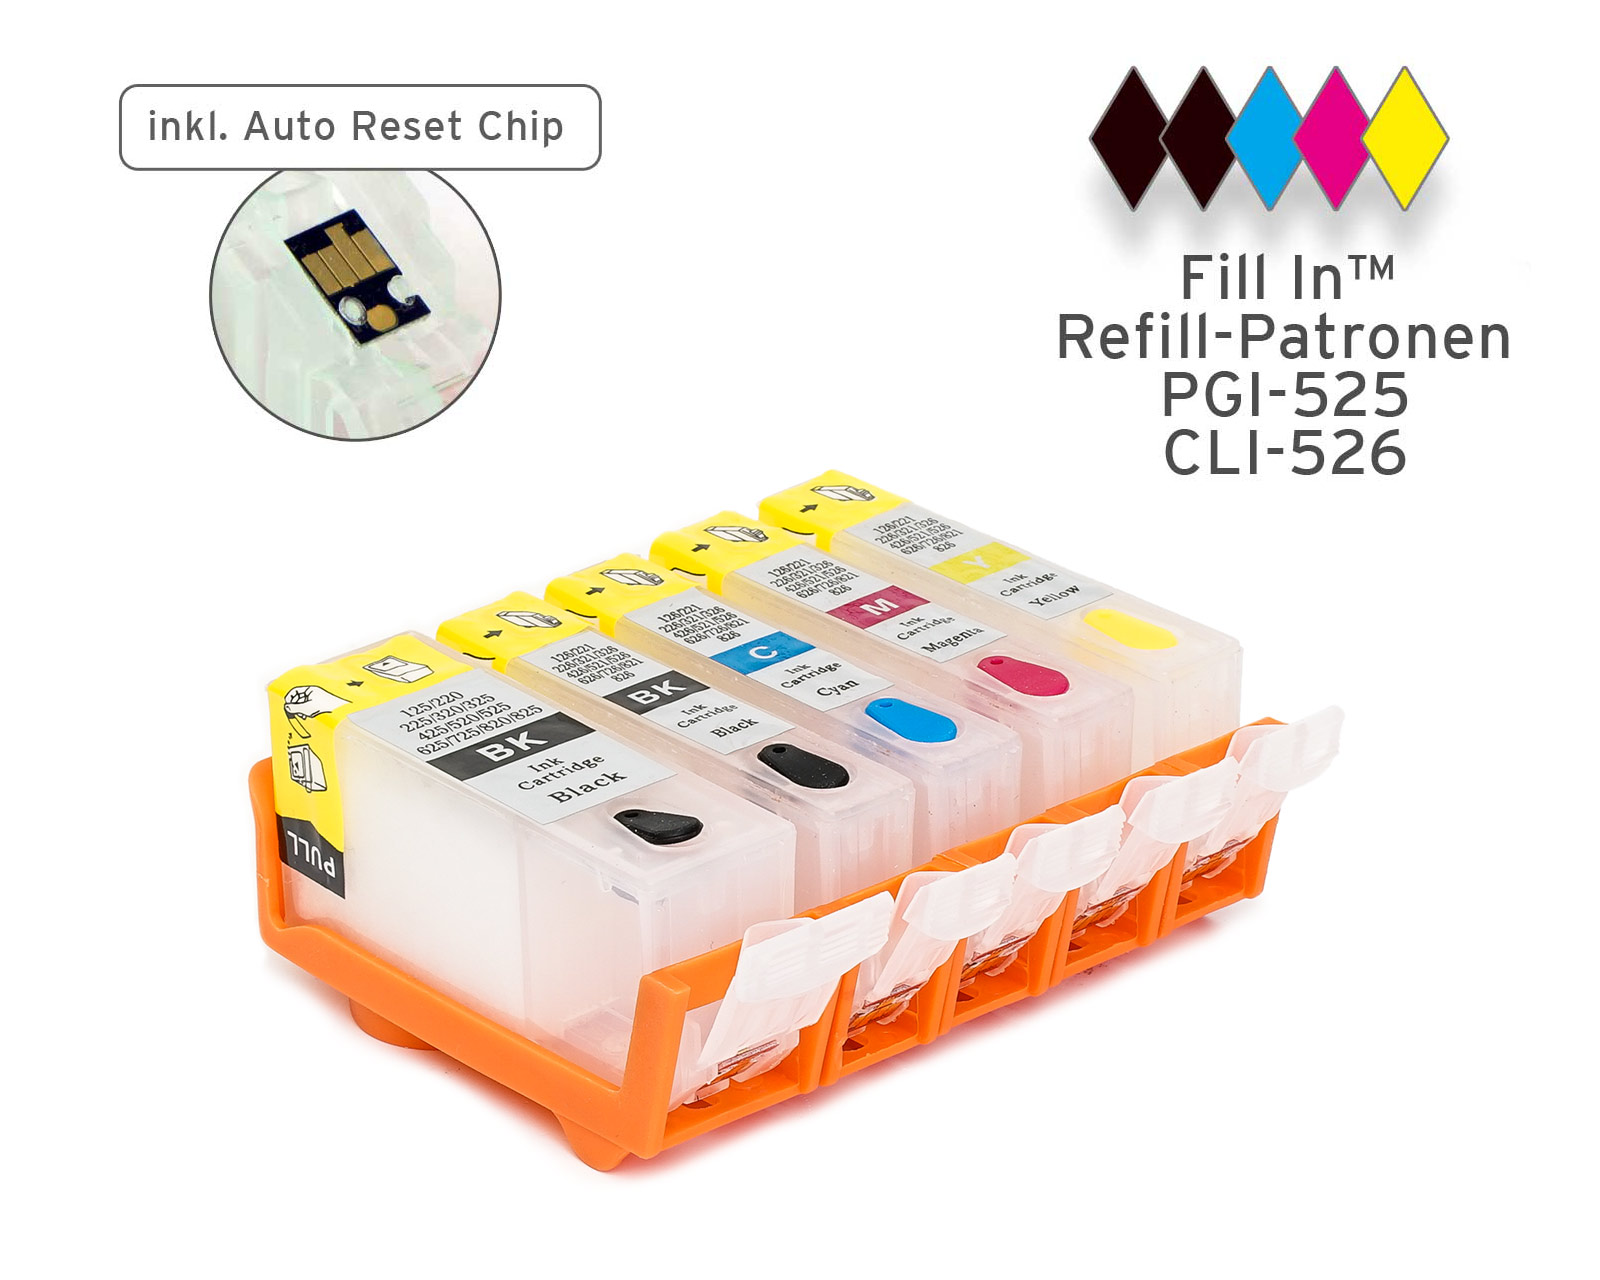 Refillable Ink Cartridges for Canon PGI-525, CLI-526 with auto reset chip